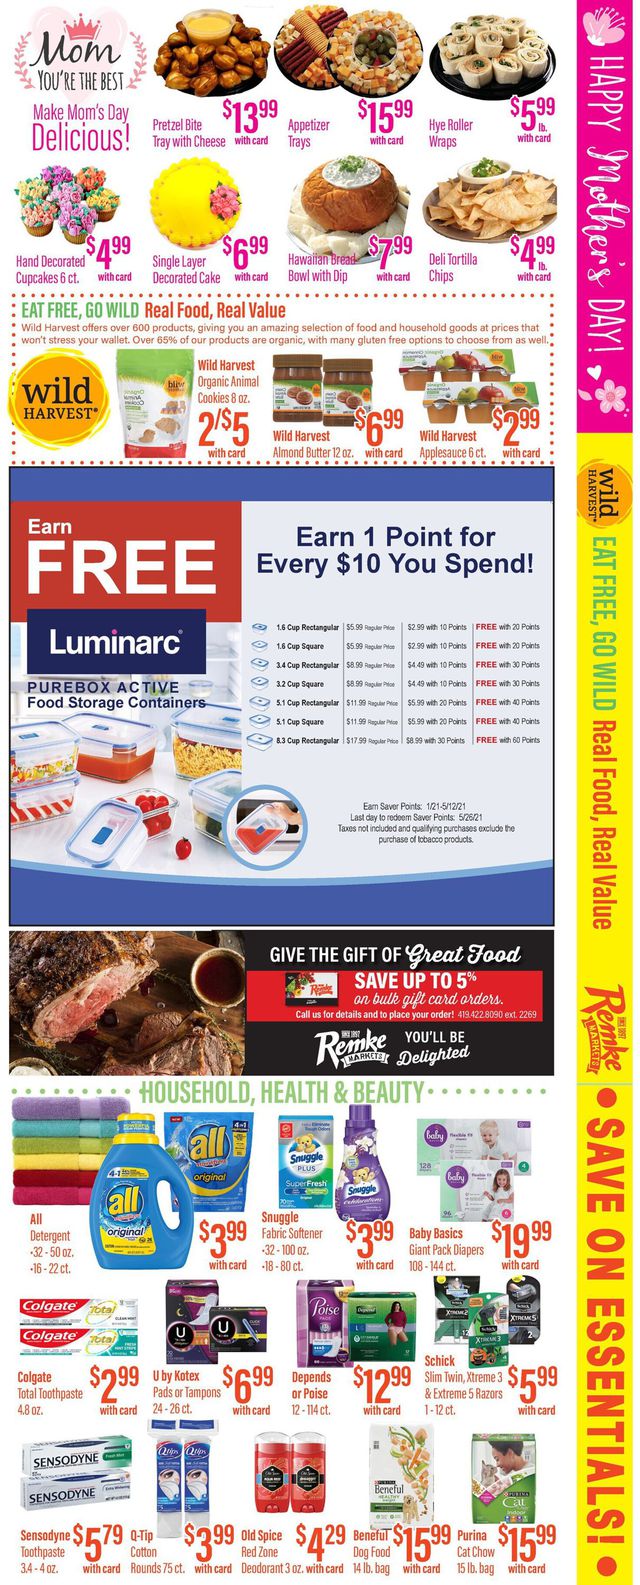 Remke Markets Ad from 05/06/2021